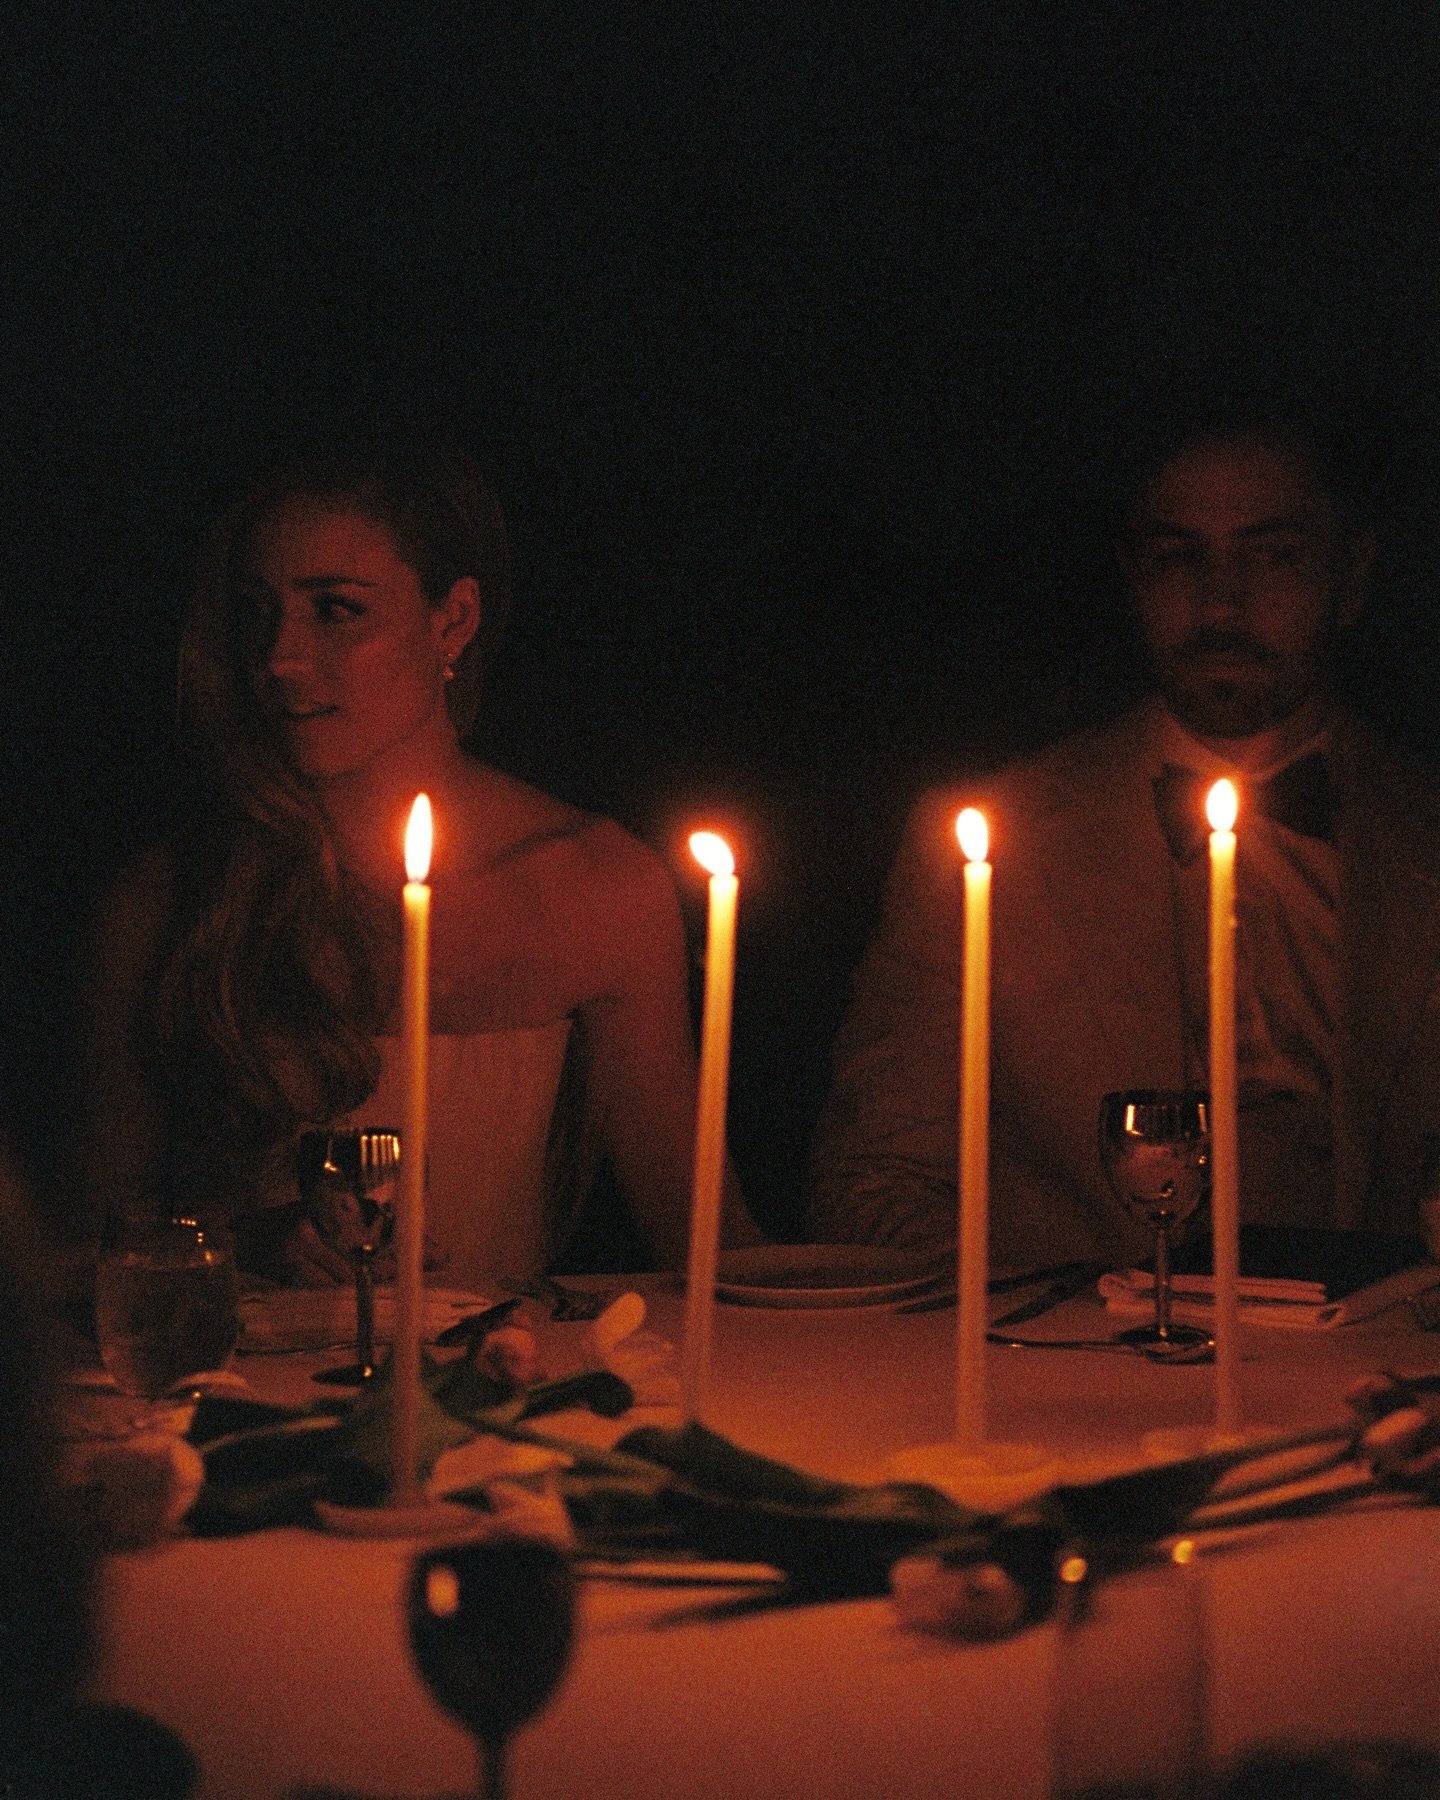 By candlelight @okra.candle 

@johnjoseph_foodanatomy 
@curated_event 
@olivialefebvre @crball87